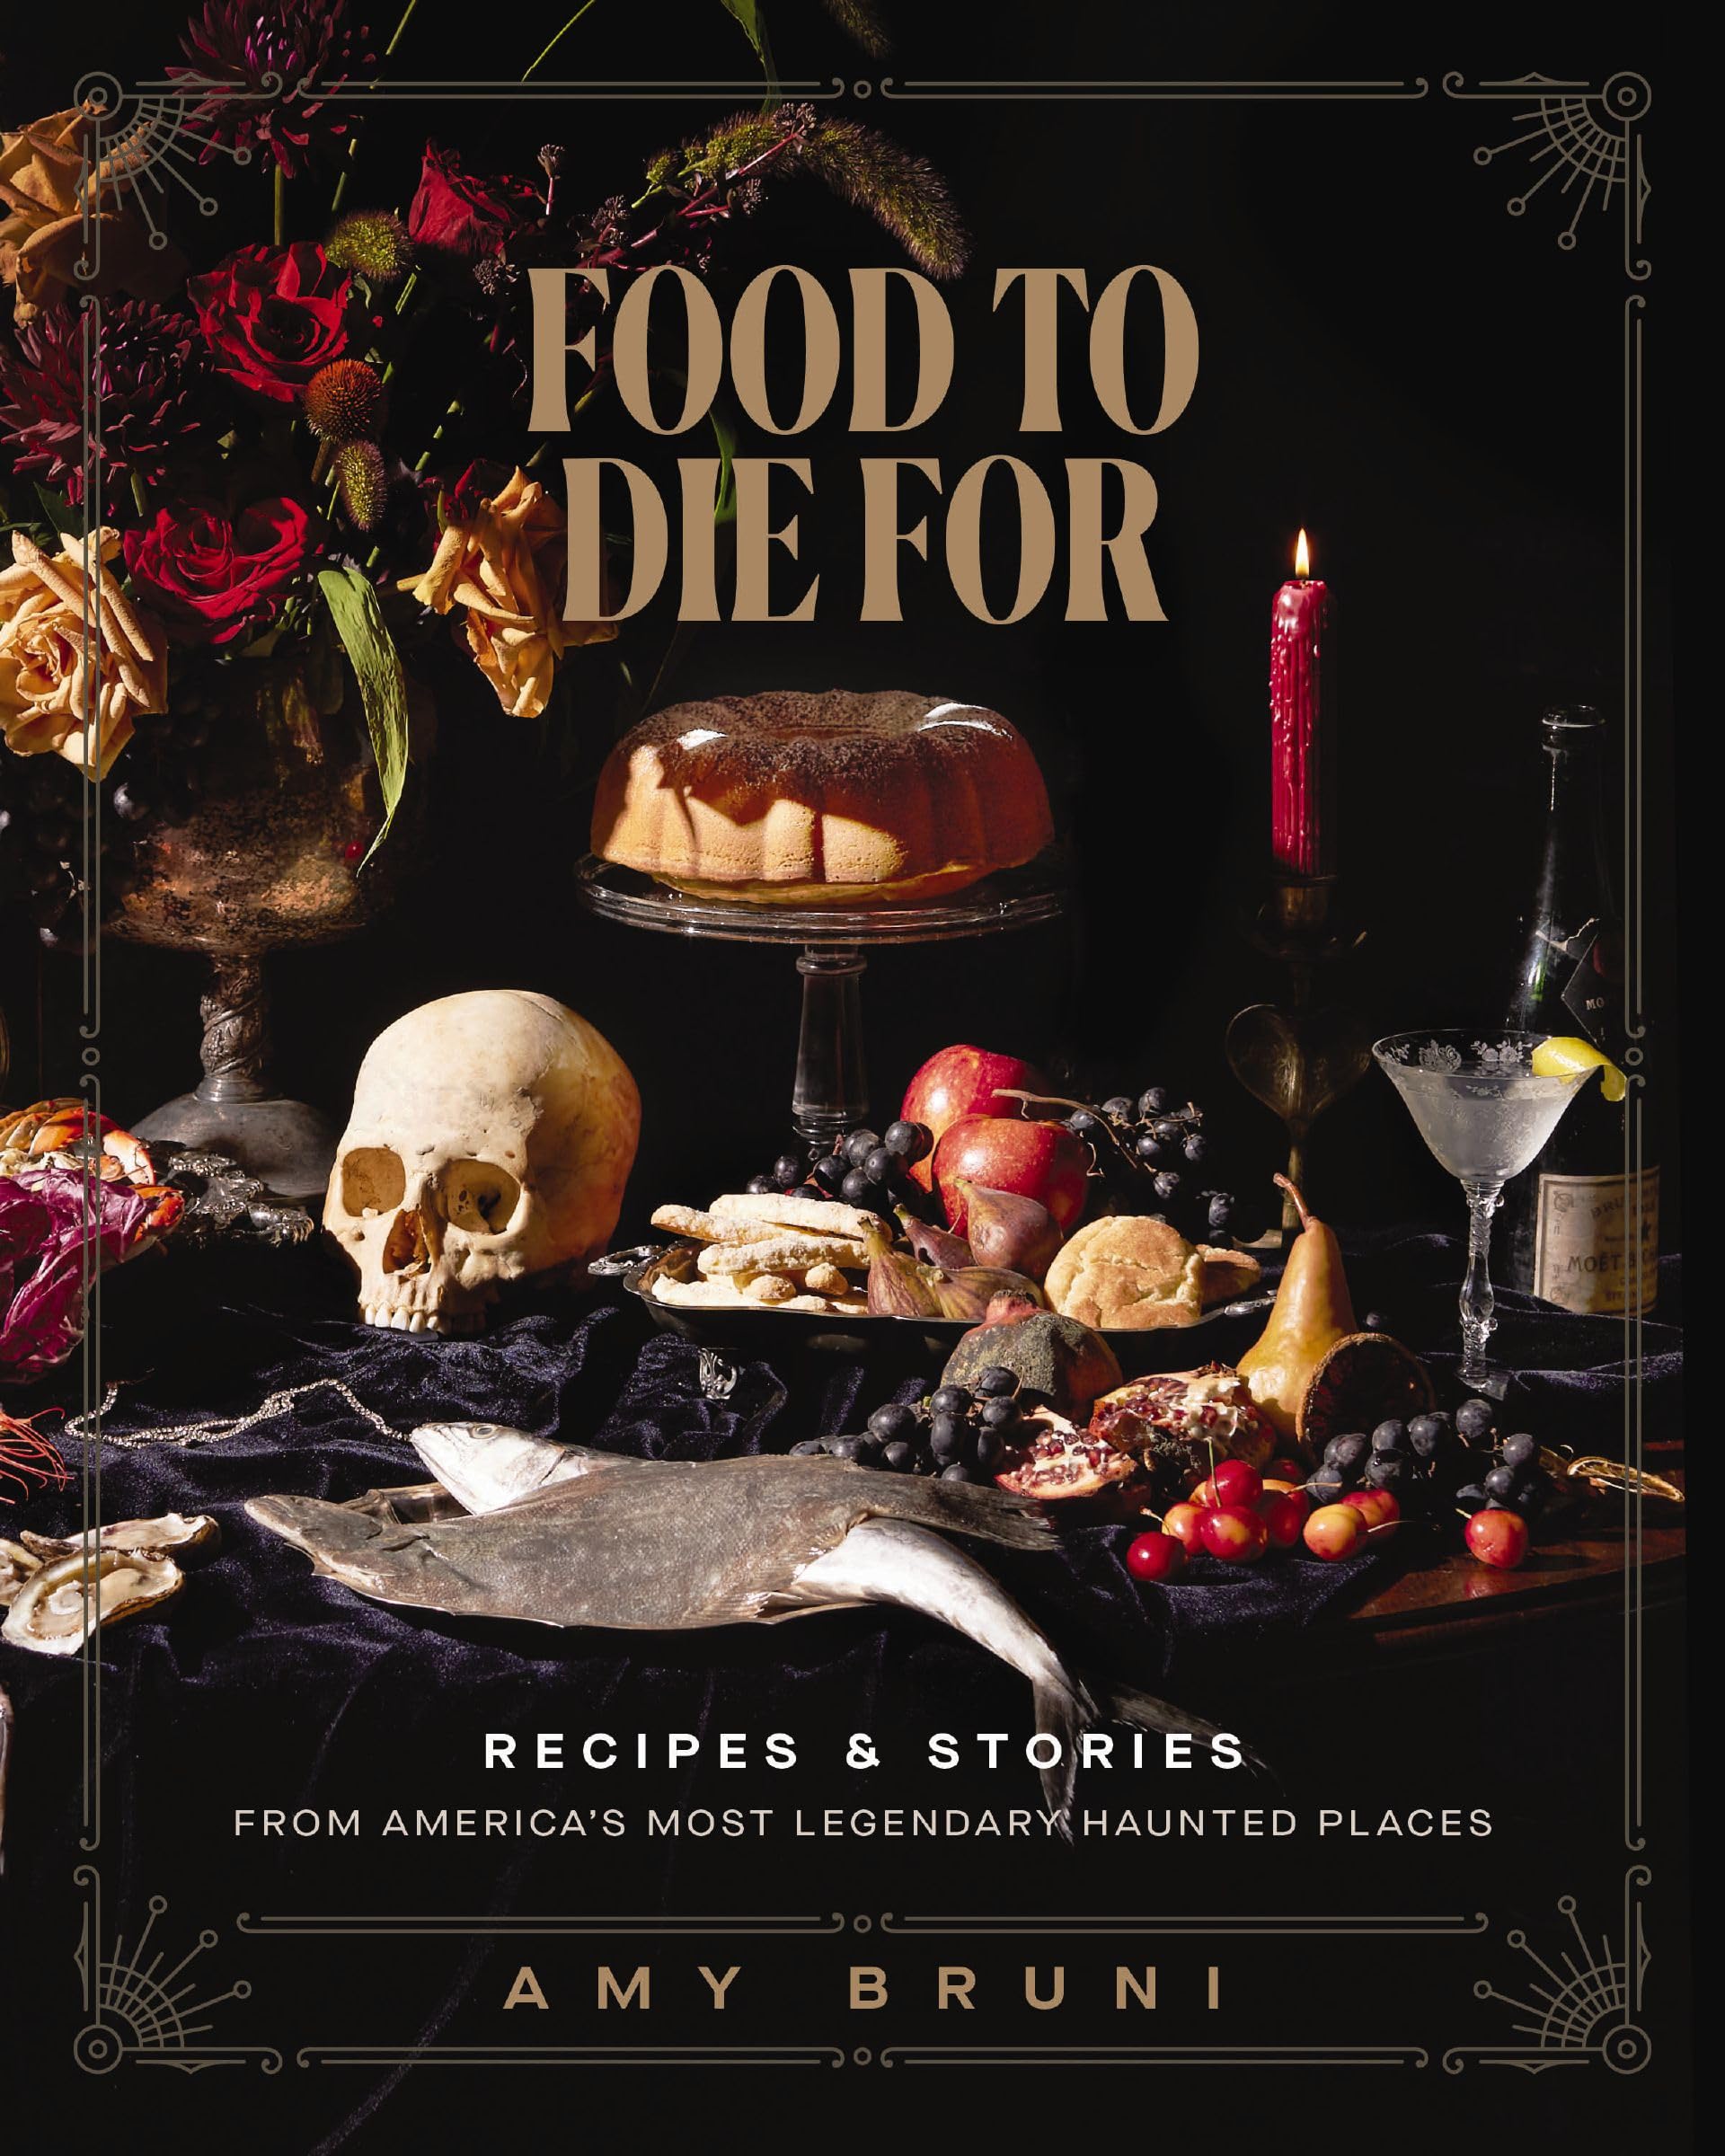 Food to Die For: Recipes and Stories from America's Most Legendary Haunted Places